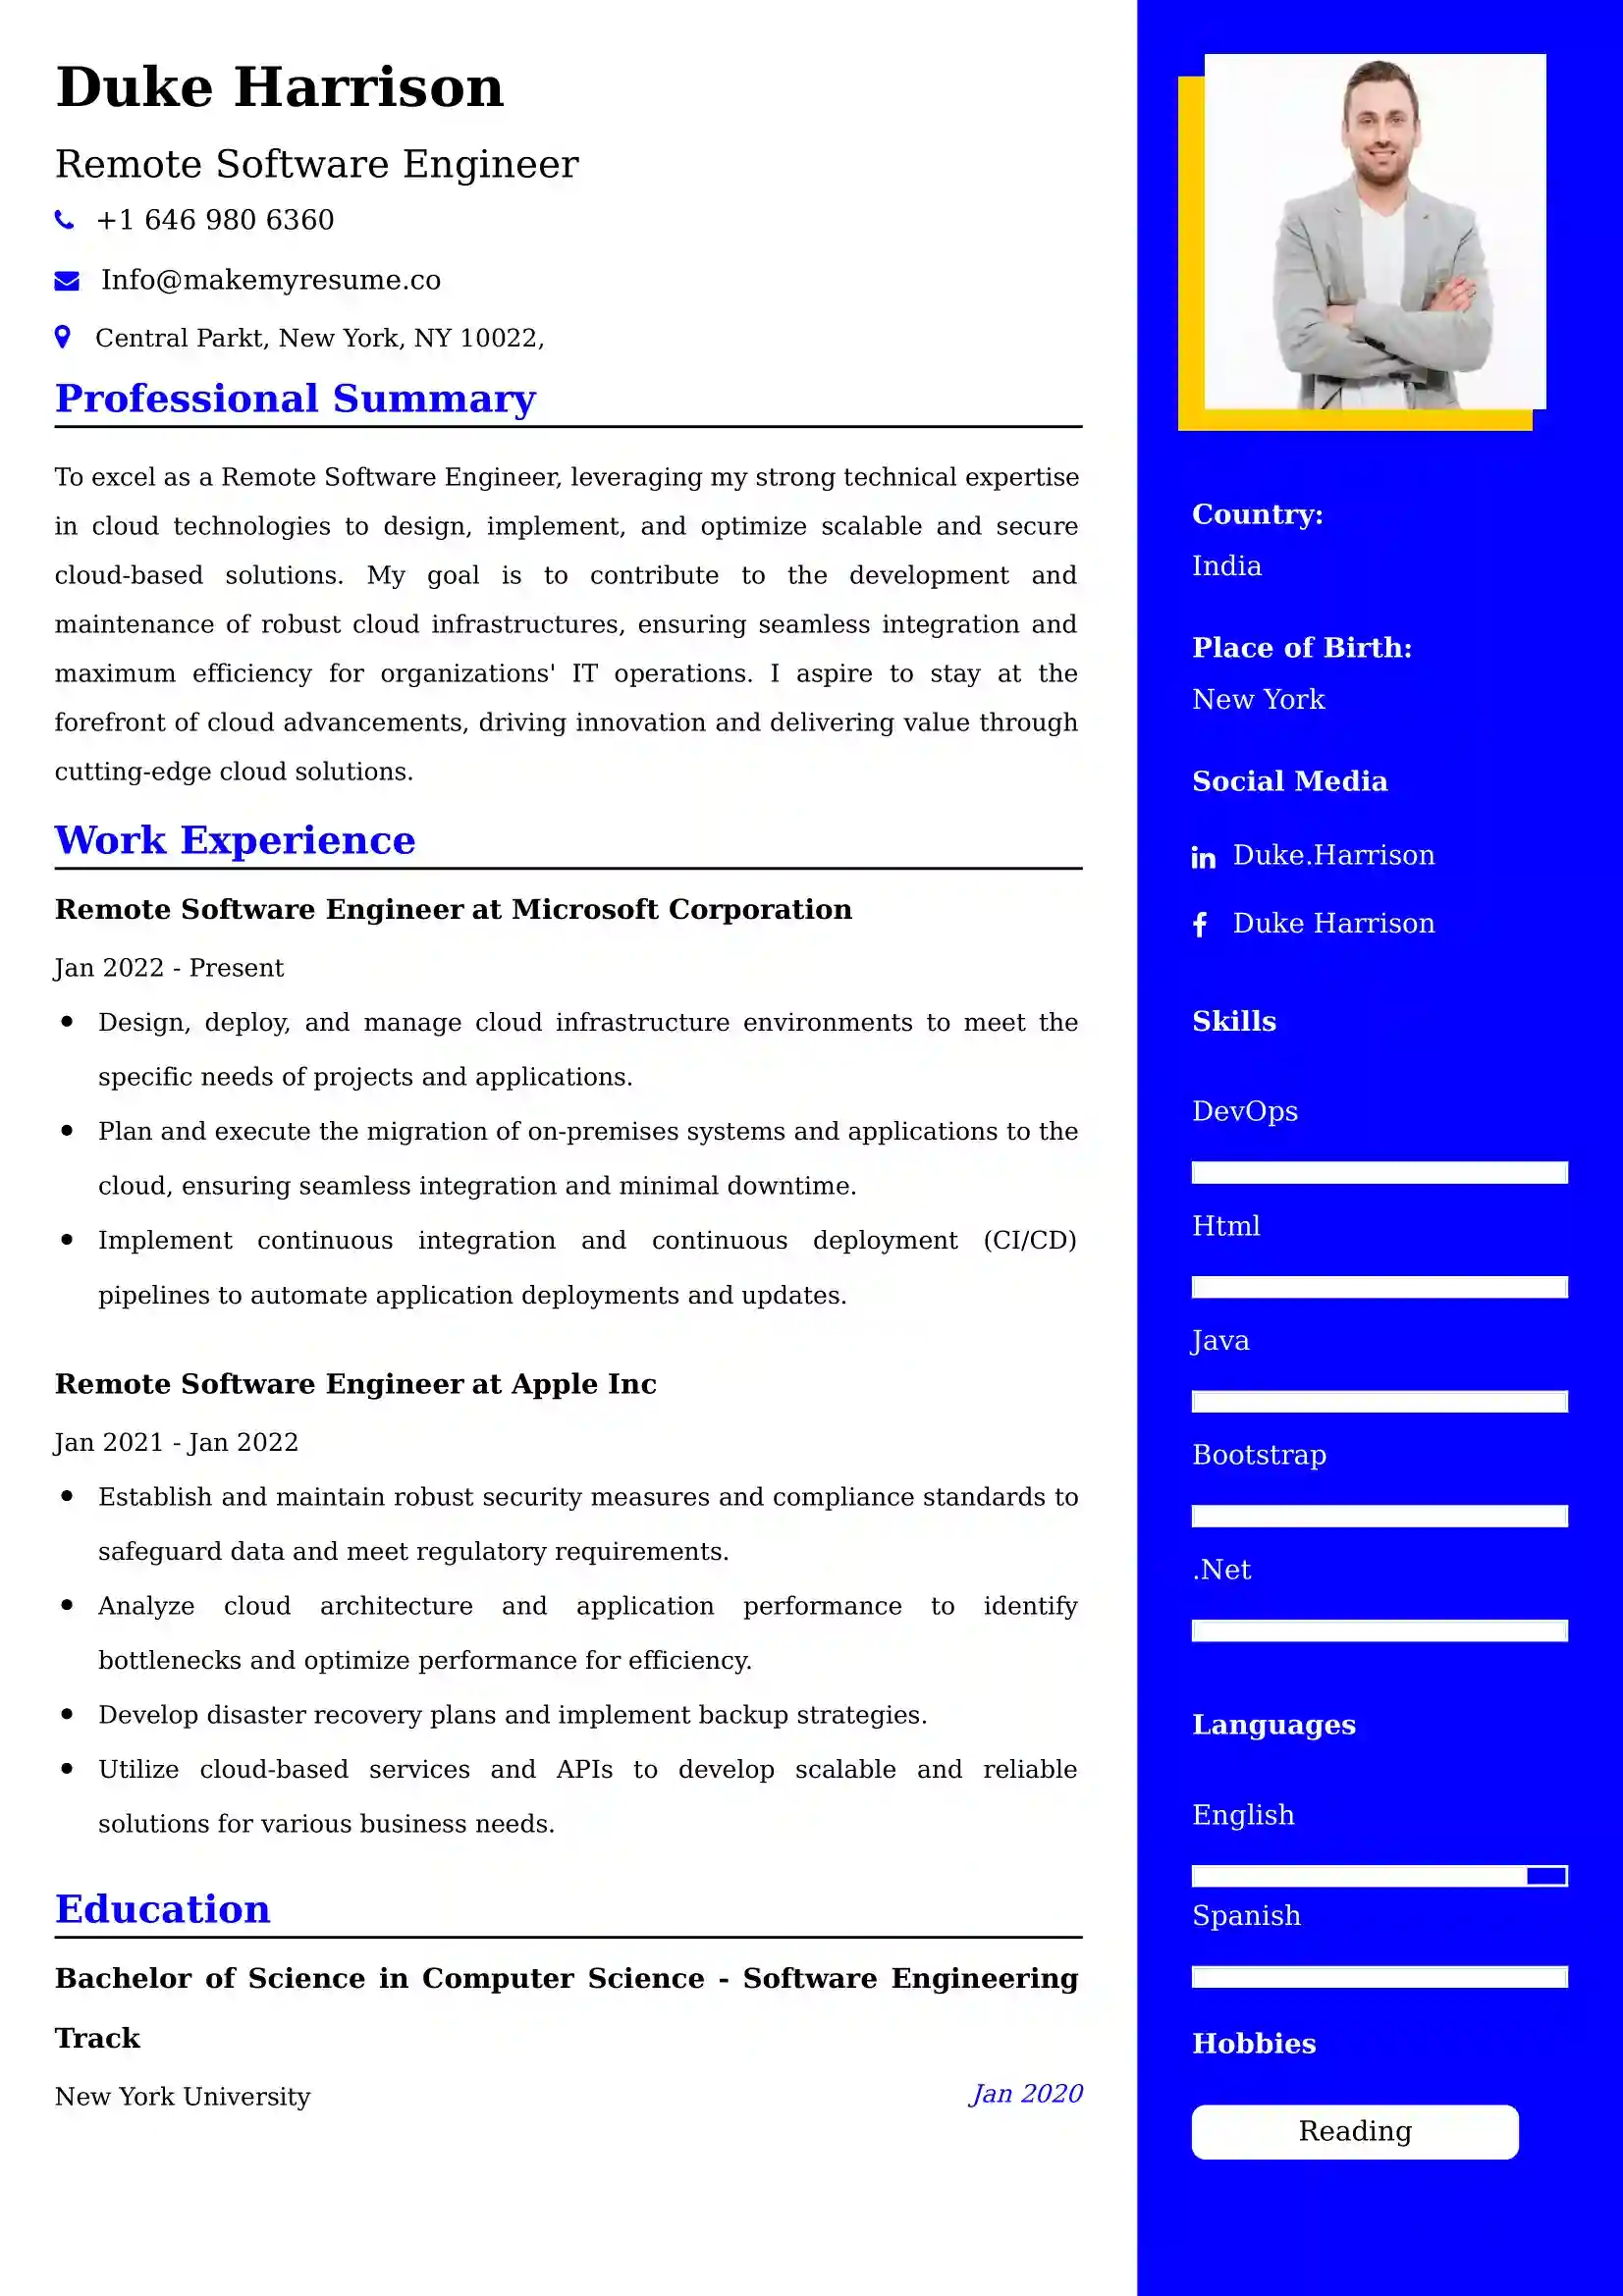 Remote Software Engineer CV Examples - US Format